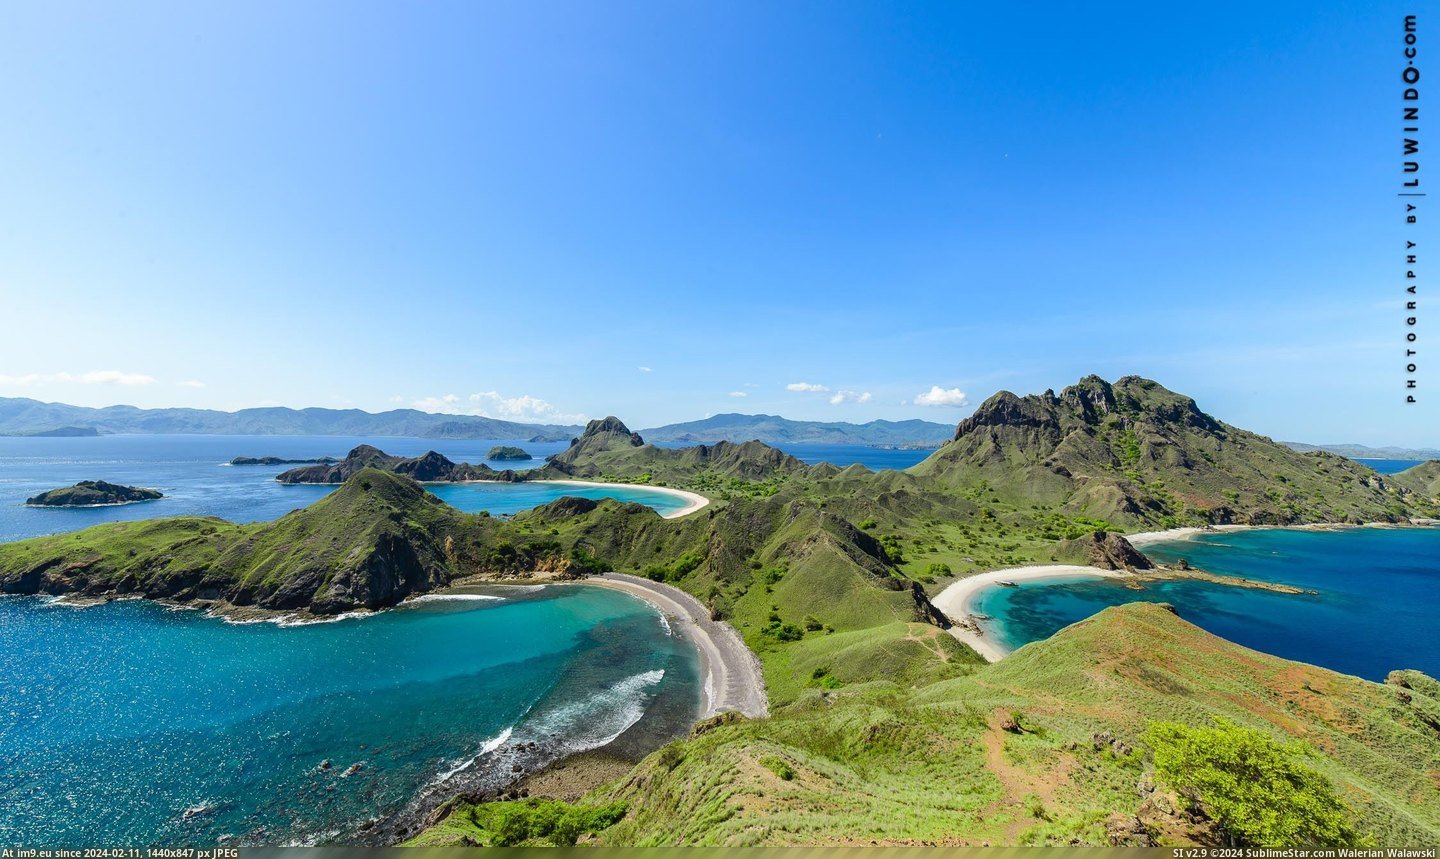 #Top #Island #Flores #Mountain #Indonesia [Earthporn] Padar Island, Flores, Indonesia - Mountain top view [2248x1334] Pic. (Изображение из альбом My r/EARTHPORN favs))